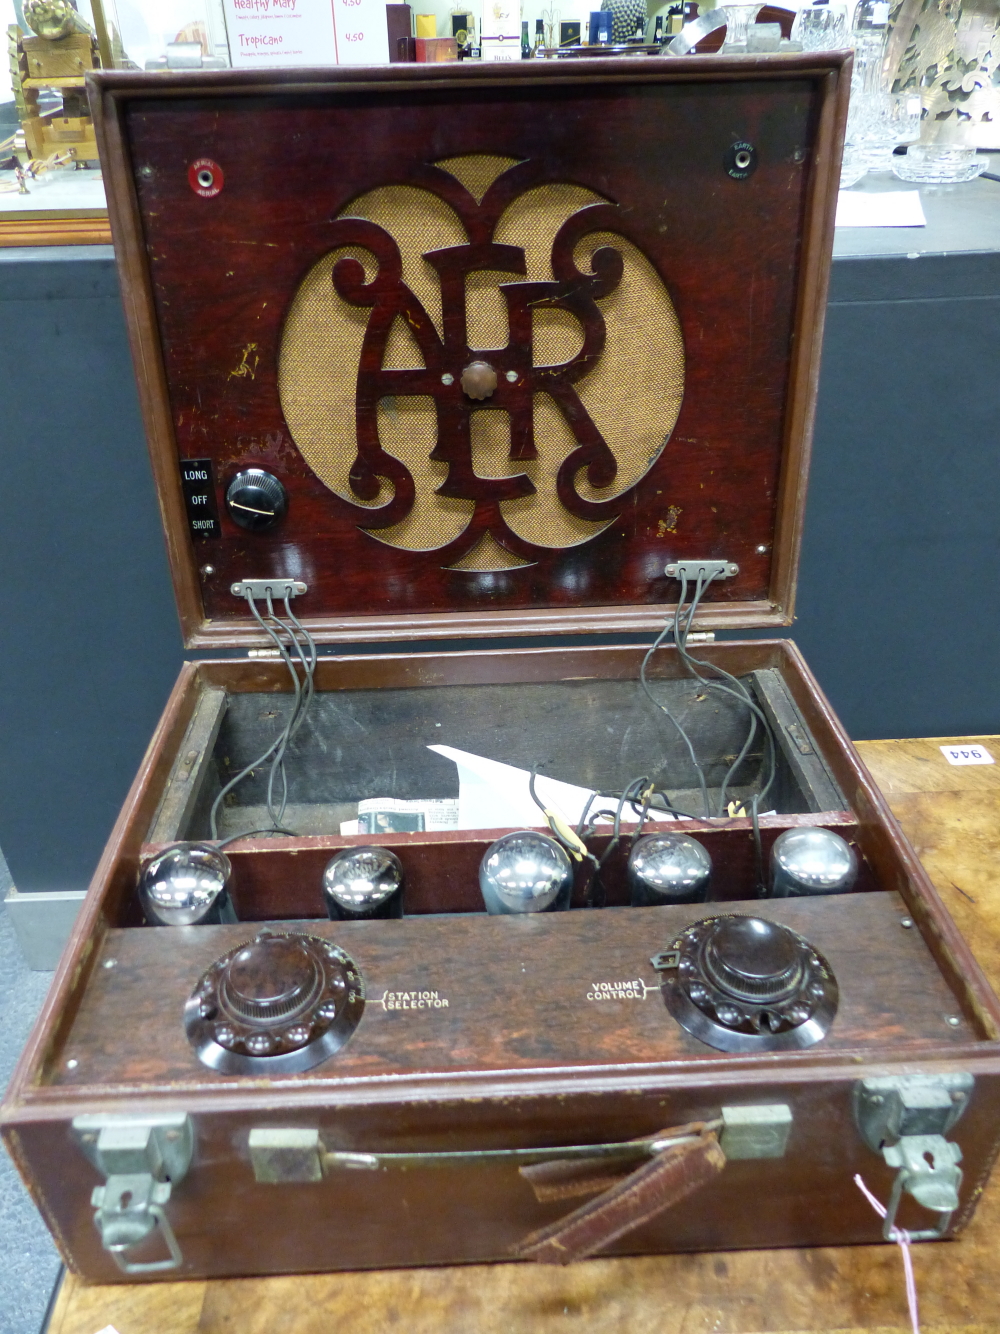 AN EARLY A.E.R. SHORT/LONG WAVE 5 VALVE RADIO IN LEATHER OUTER CASE.